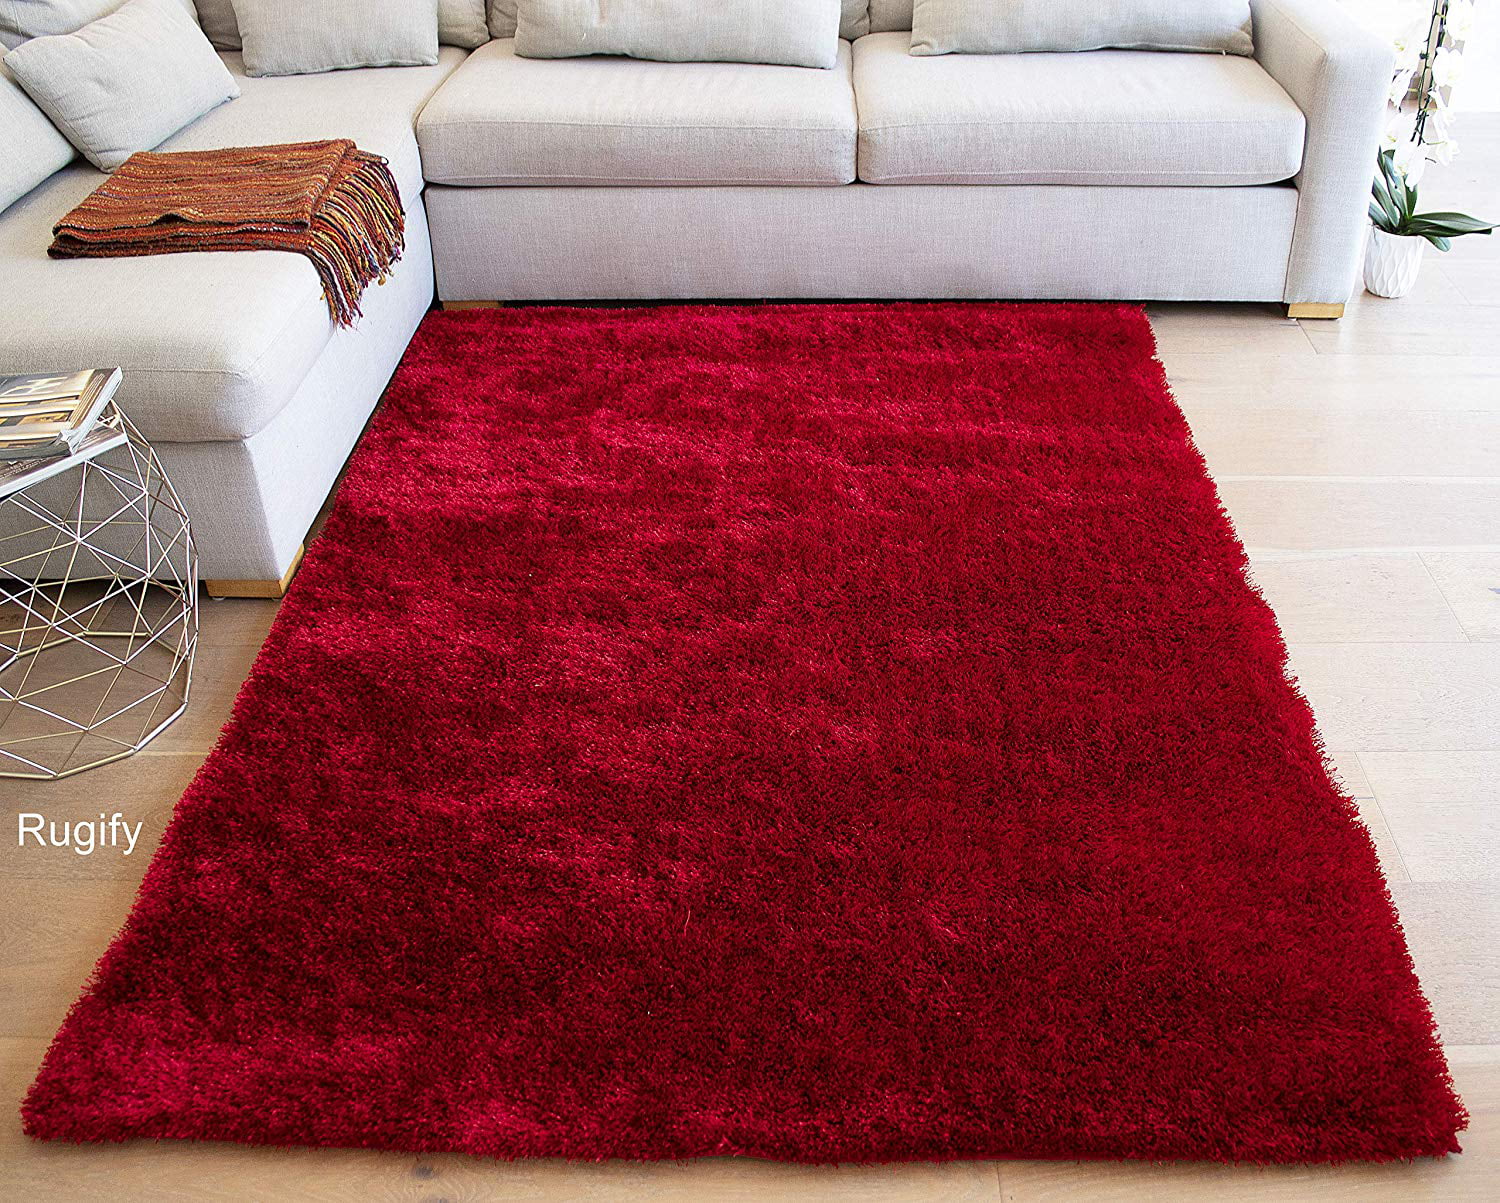 Soft Rug Material For Living Room